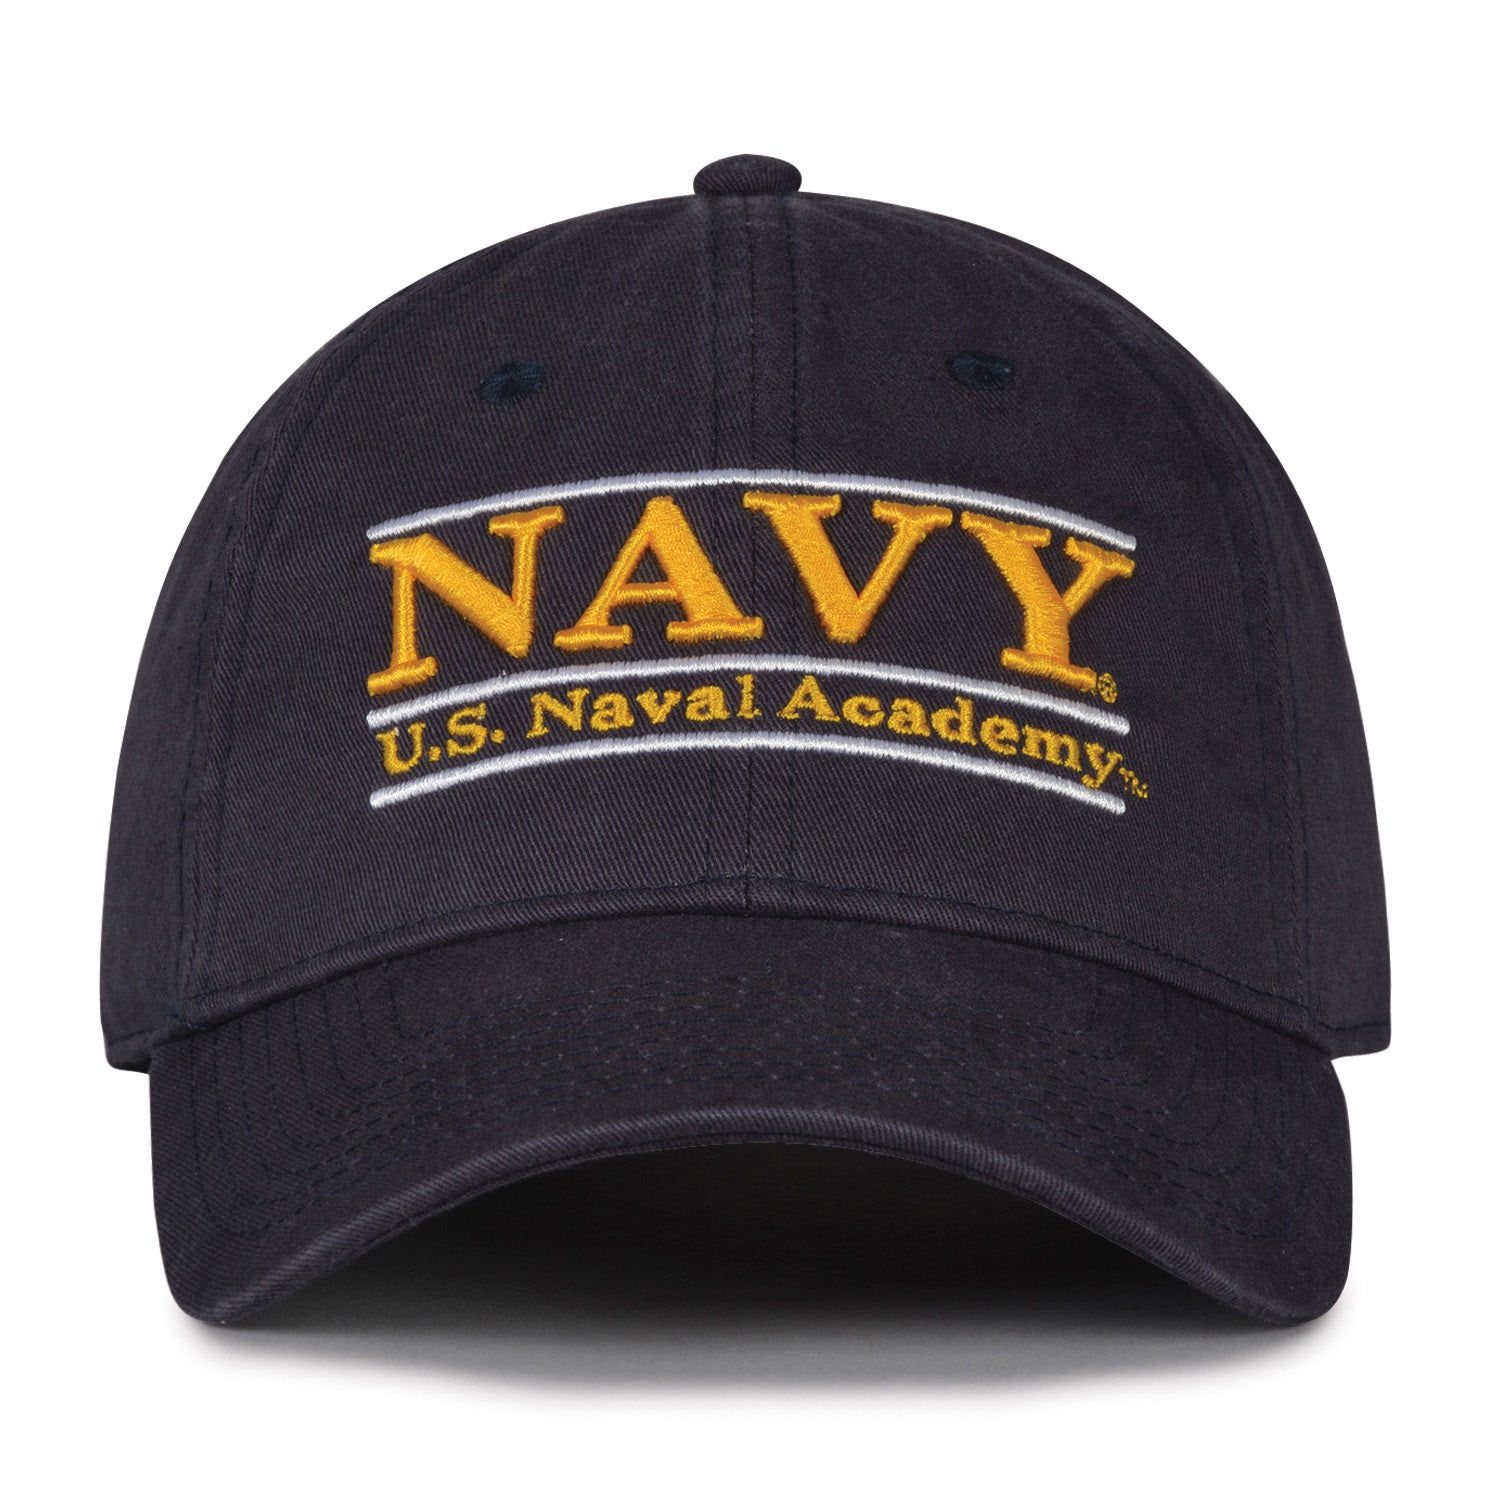 For game at Naval Academy, the Caps will blare the blue instead of